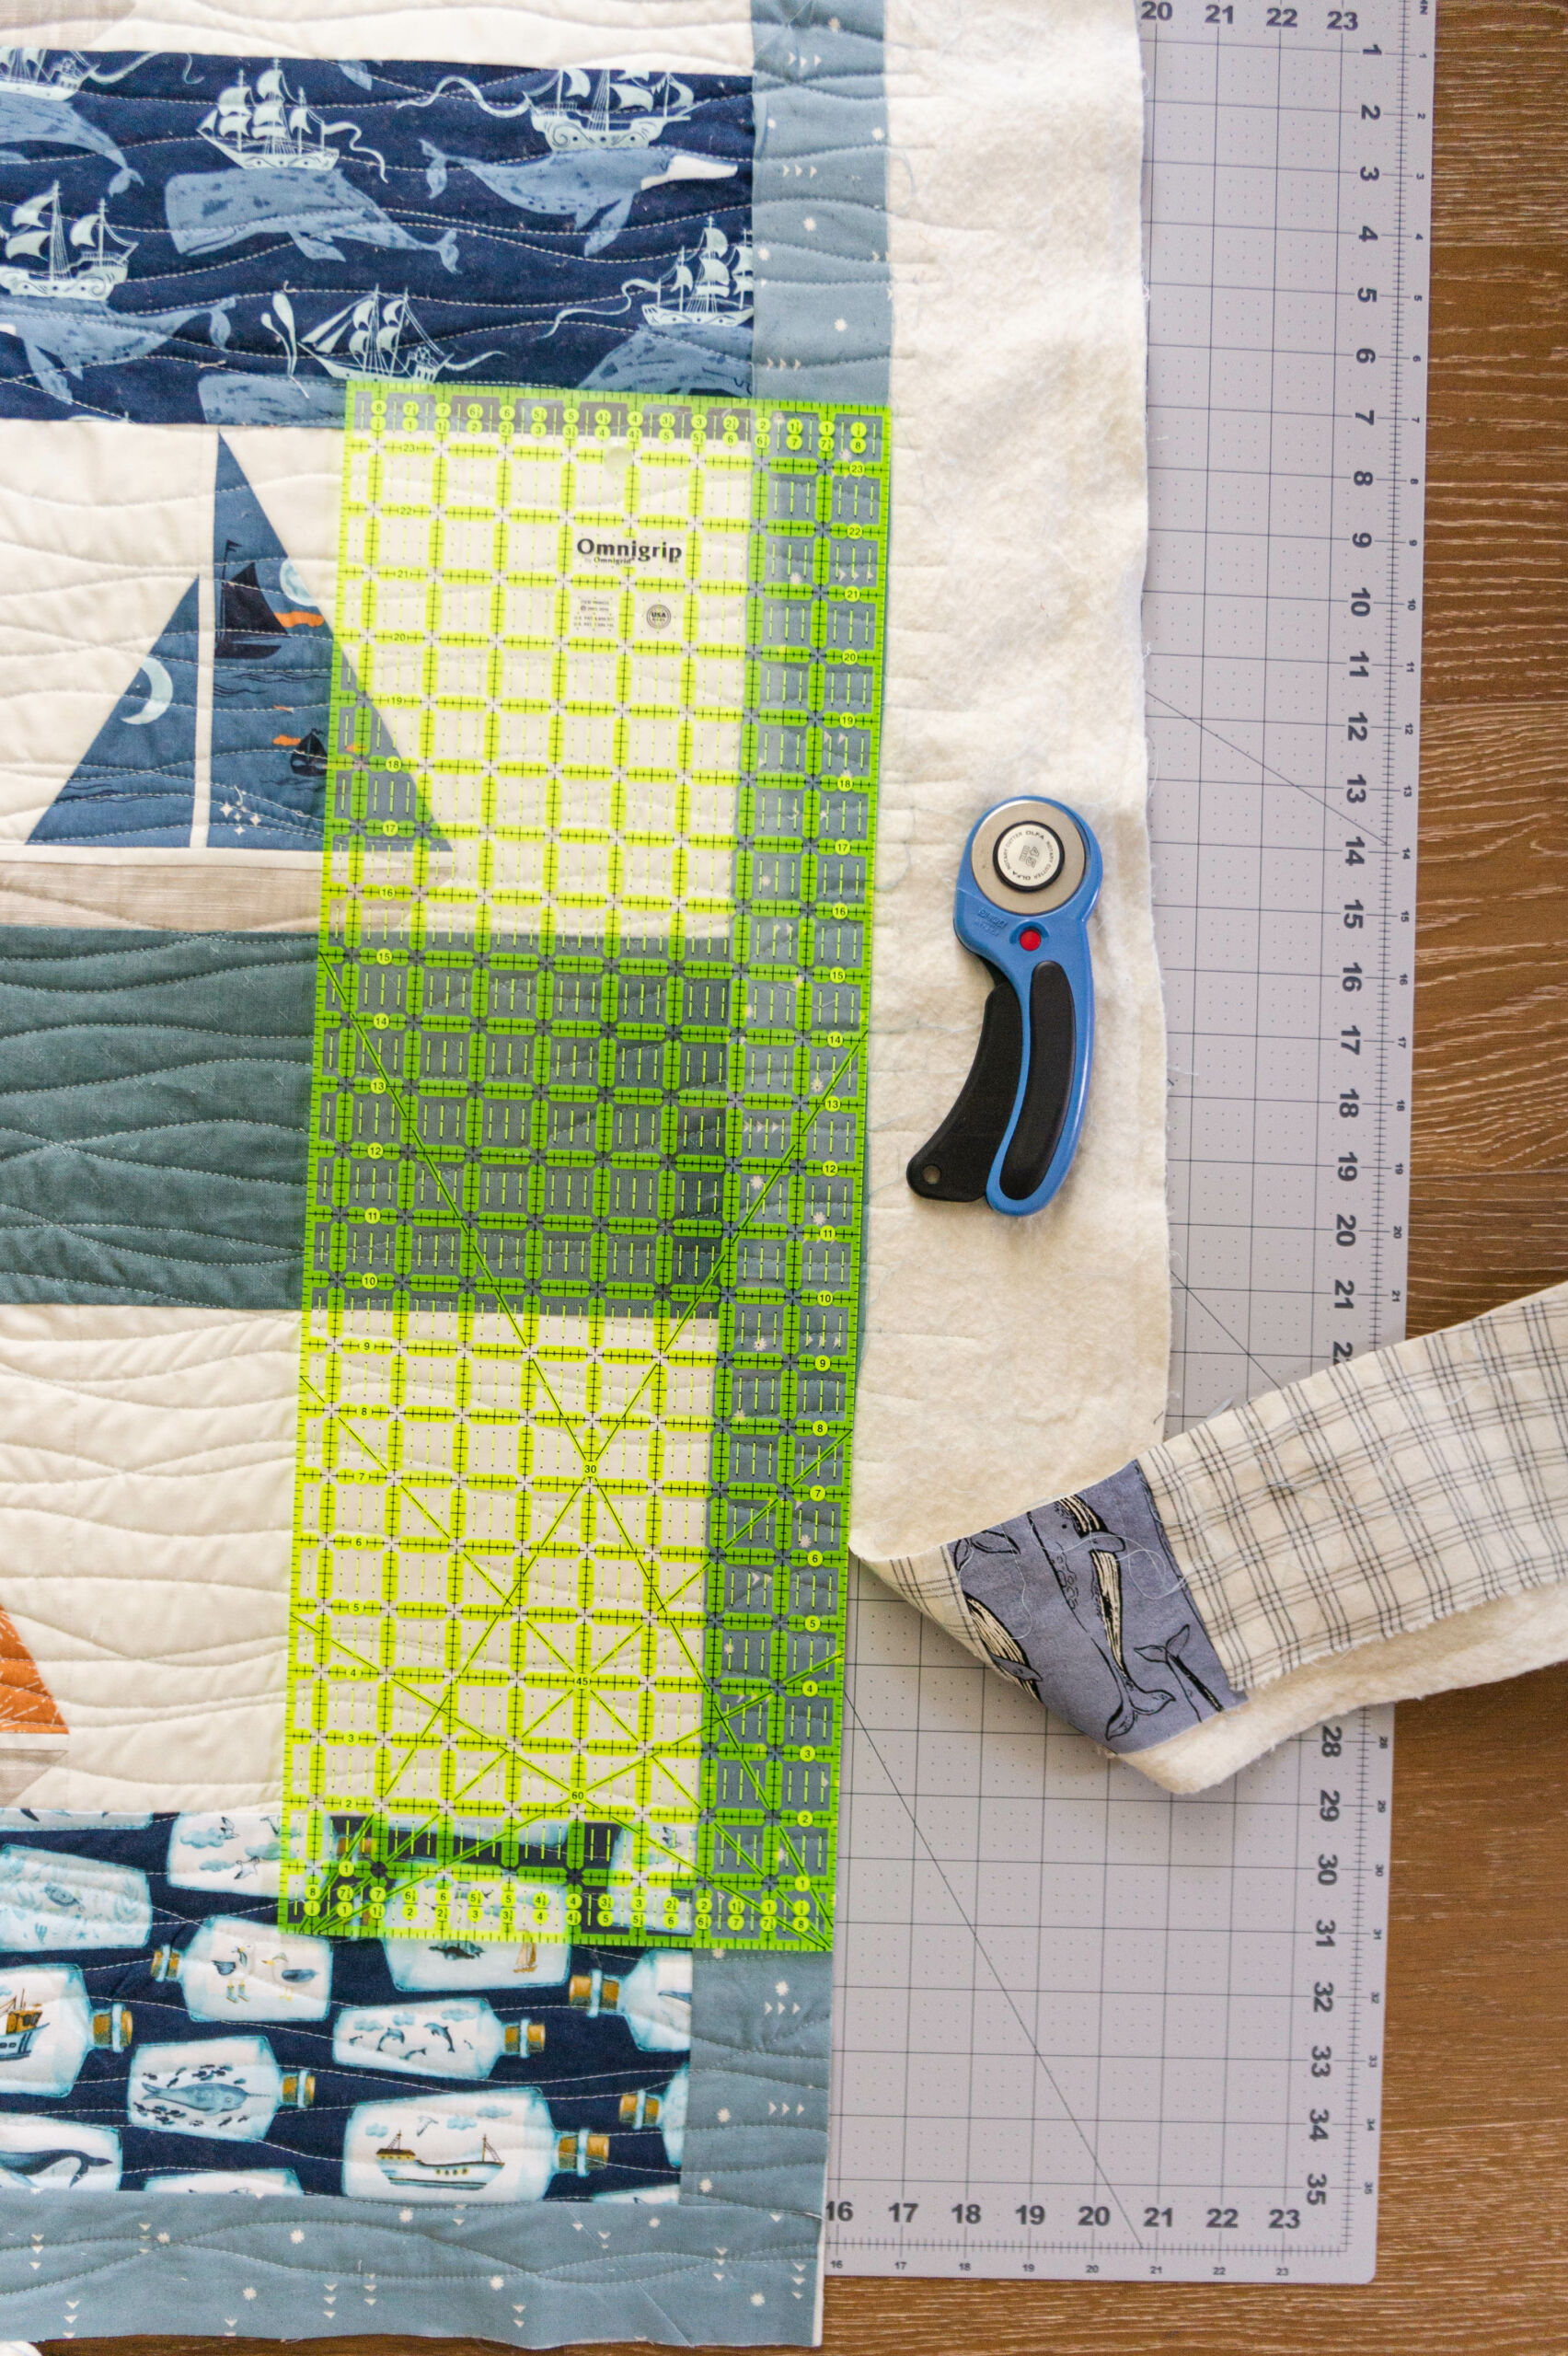 Use a few basic quilting tools and this tutorial for the fastest way to square up a quilt. Quilting can warp a quilt but we're here to help! suzyquilts.com #quilting